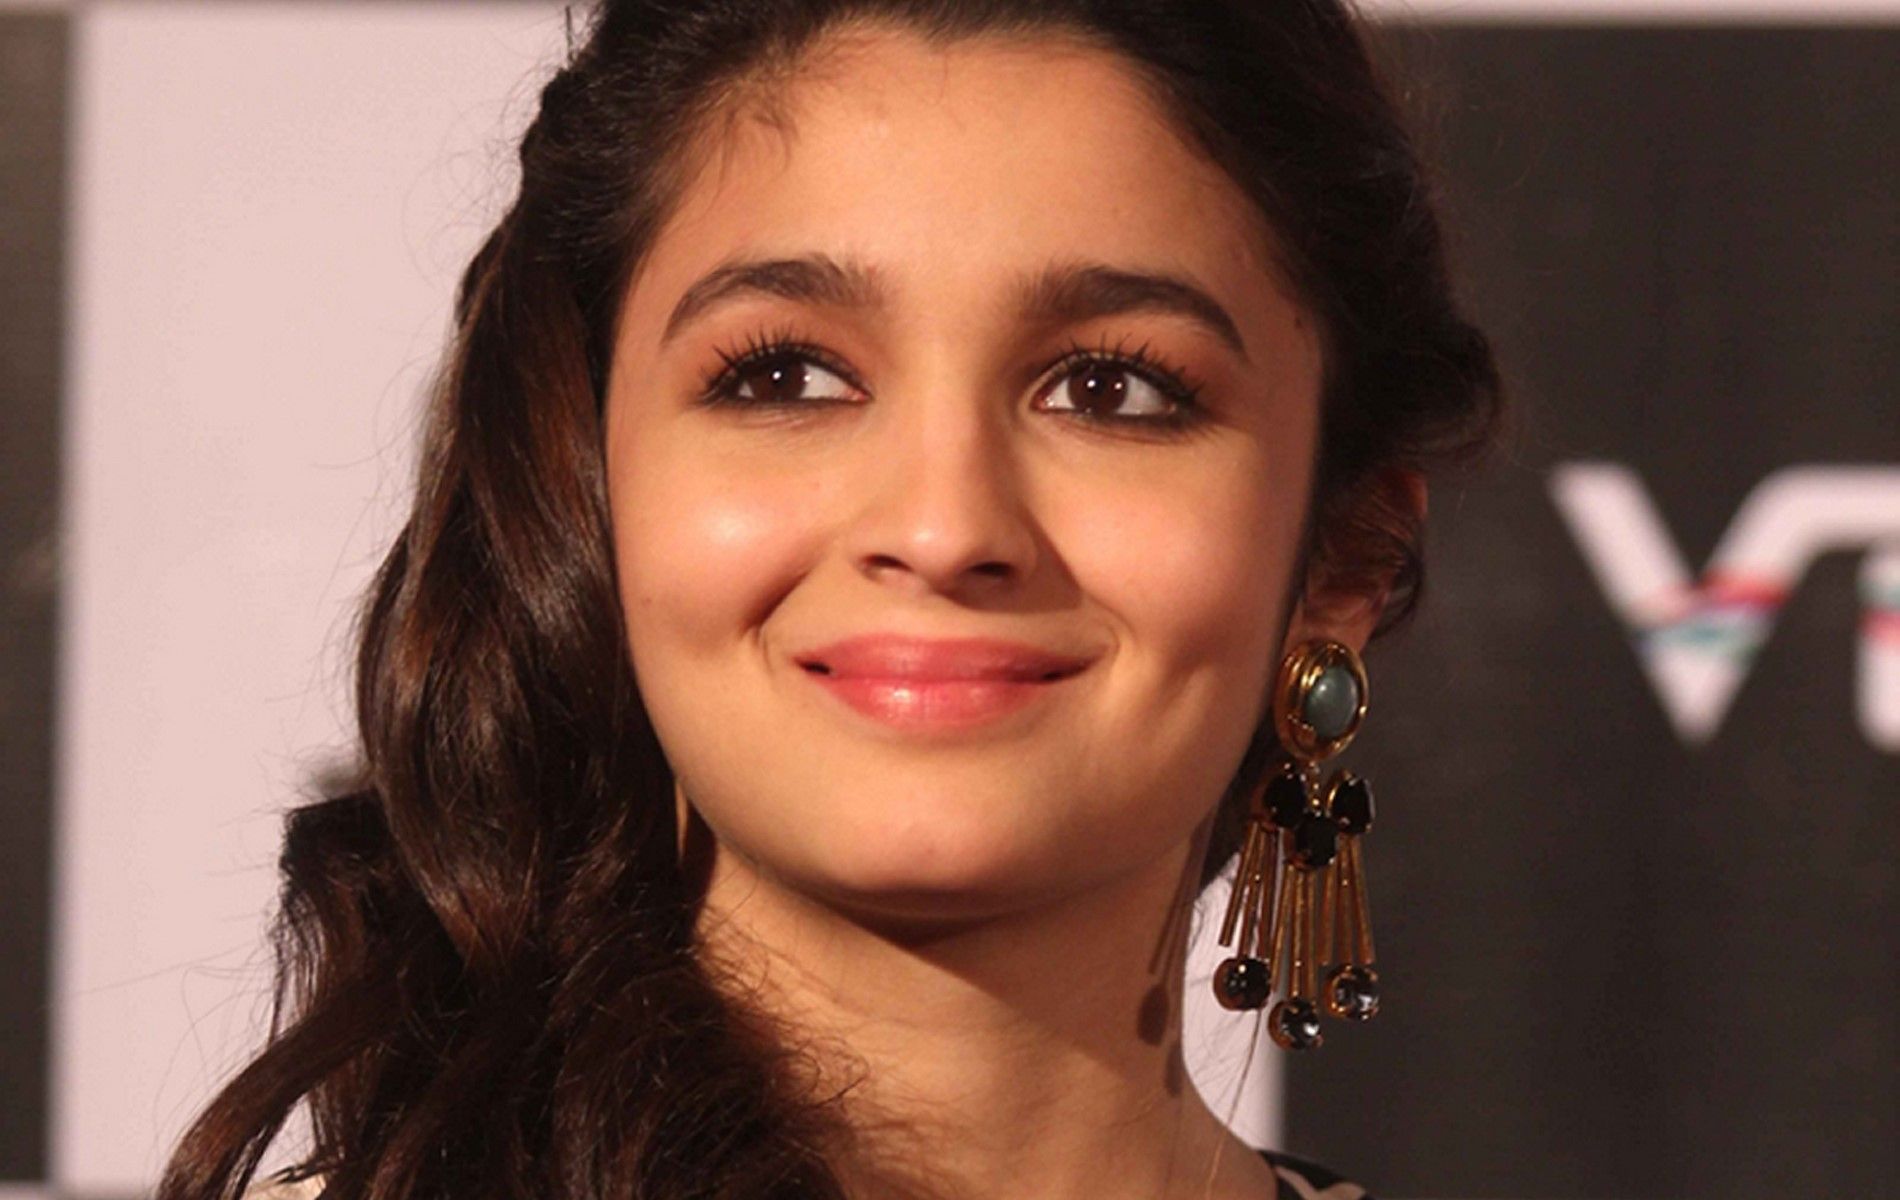 Download 1900x1200 Cute Smile of Famous Bollywood Actress Alia Bhatt HD Wallpaper